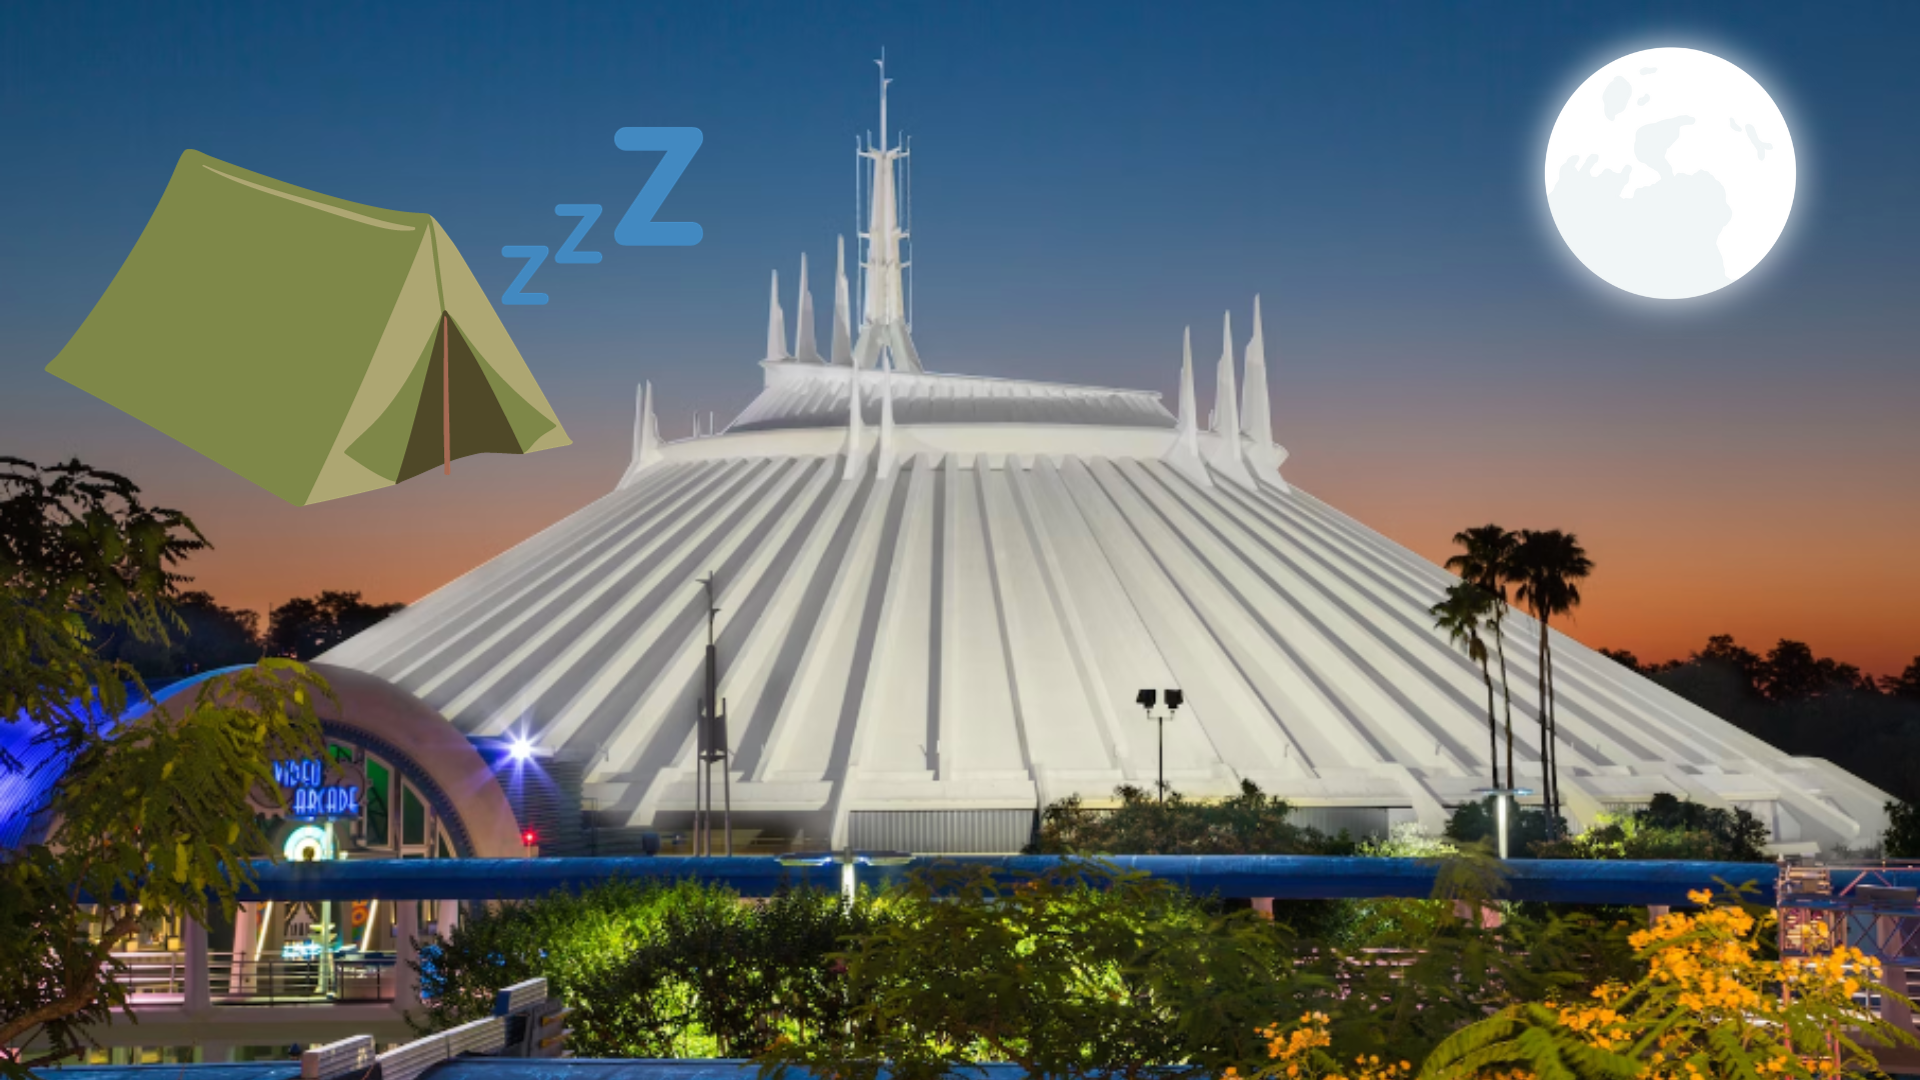 You can soon sleep inside Space Mountain under the stars